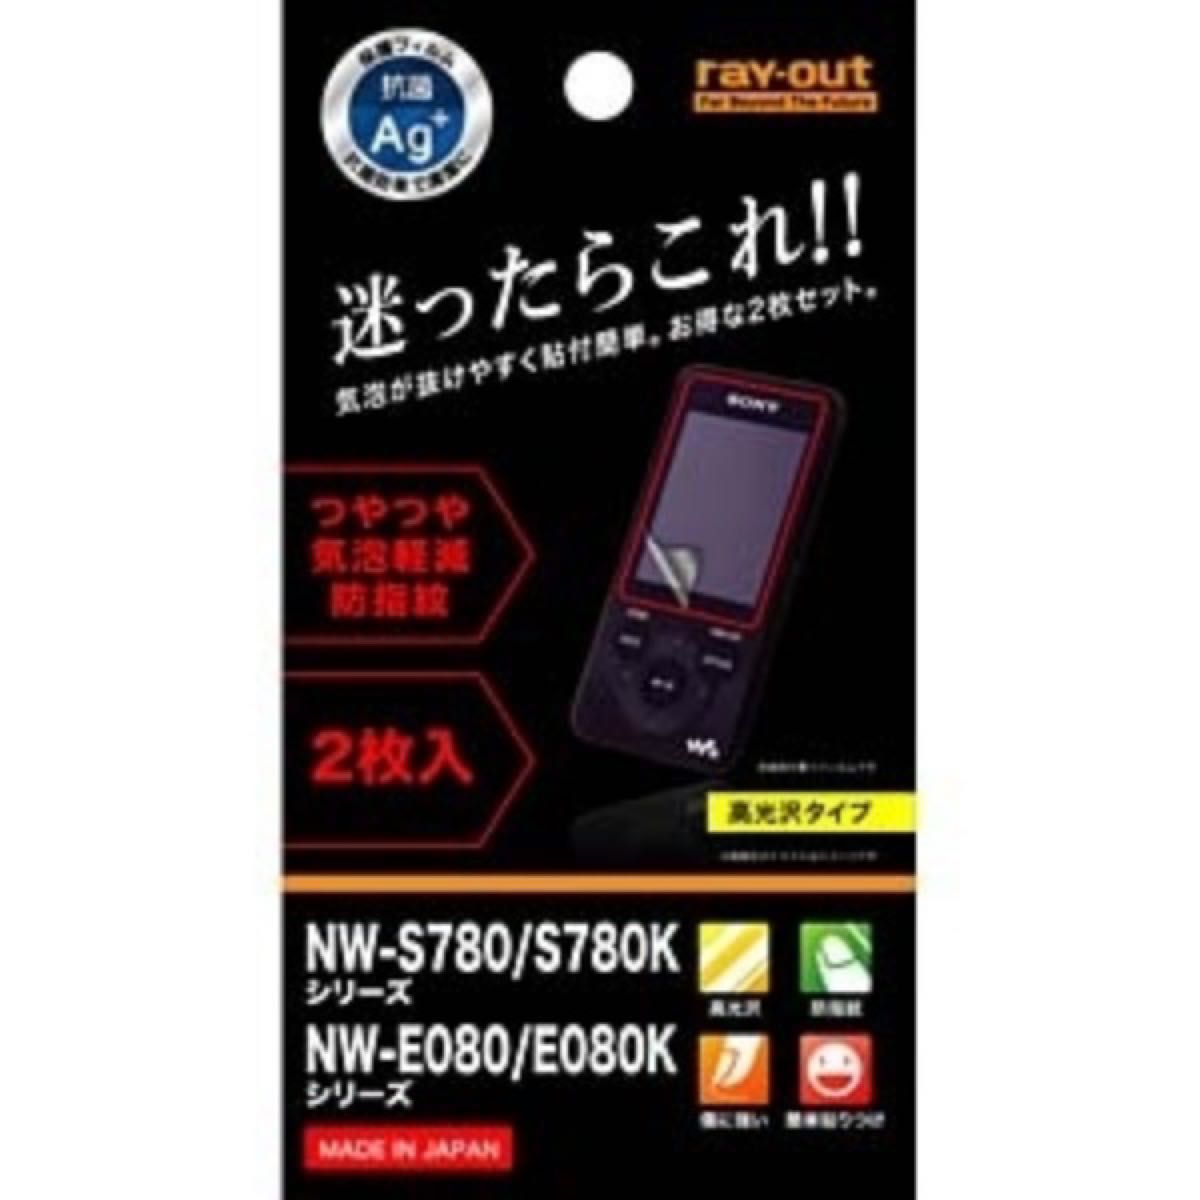  Walkman NW-S780 E080用 液晶保護フィルム 2枚入り RT-SS78F/A2 レイアウト RAY-OUT